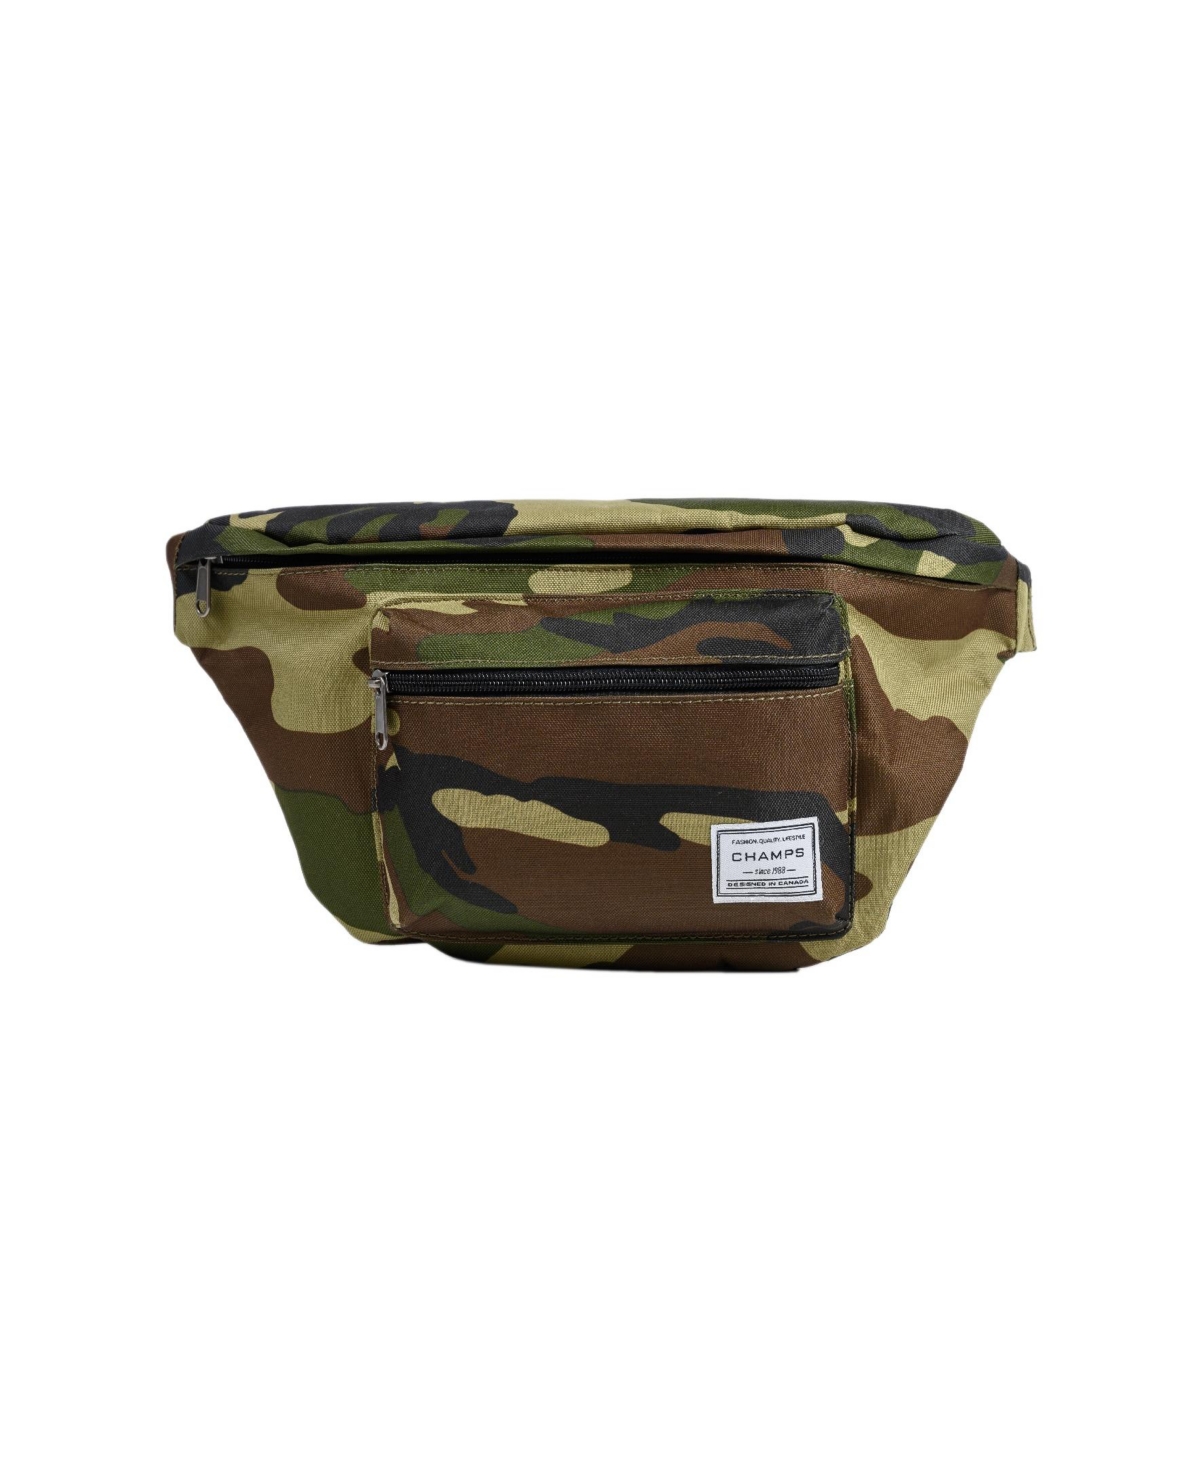 Champs Canvas Waist Pack In Camo